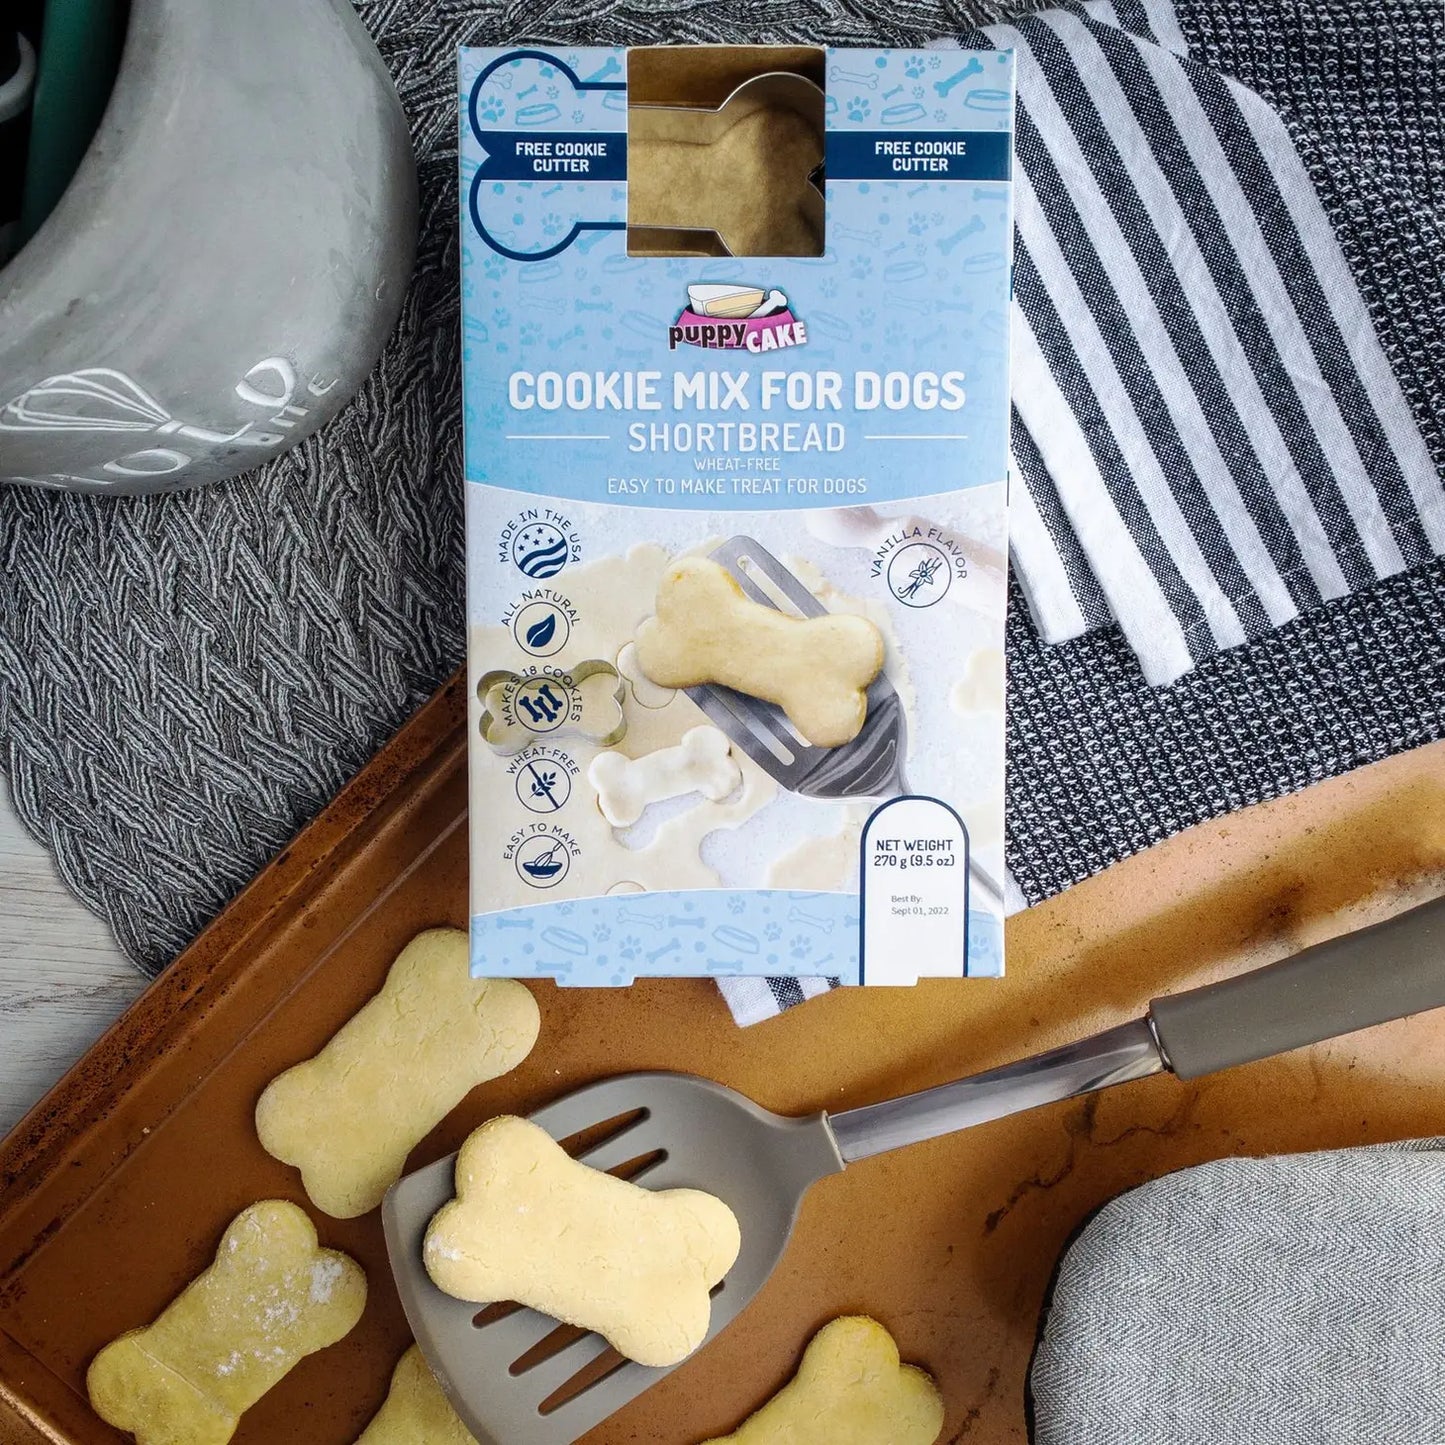 Shortbread Cookie Mix For Dogs